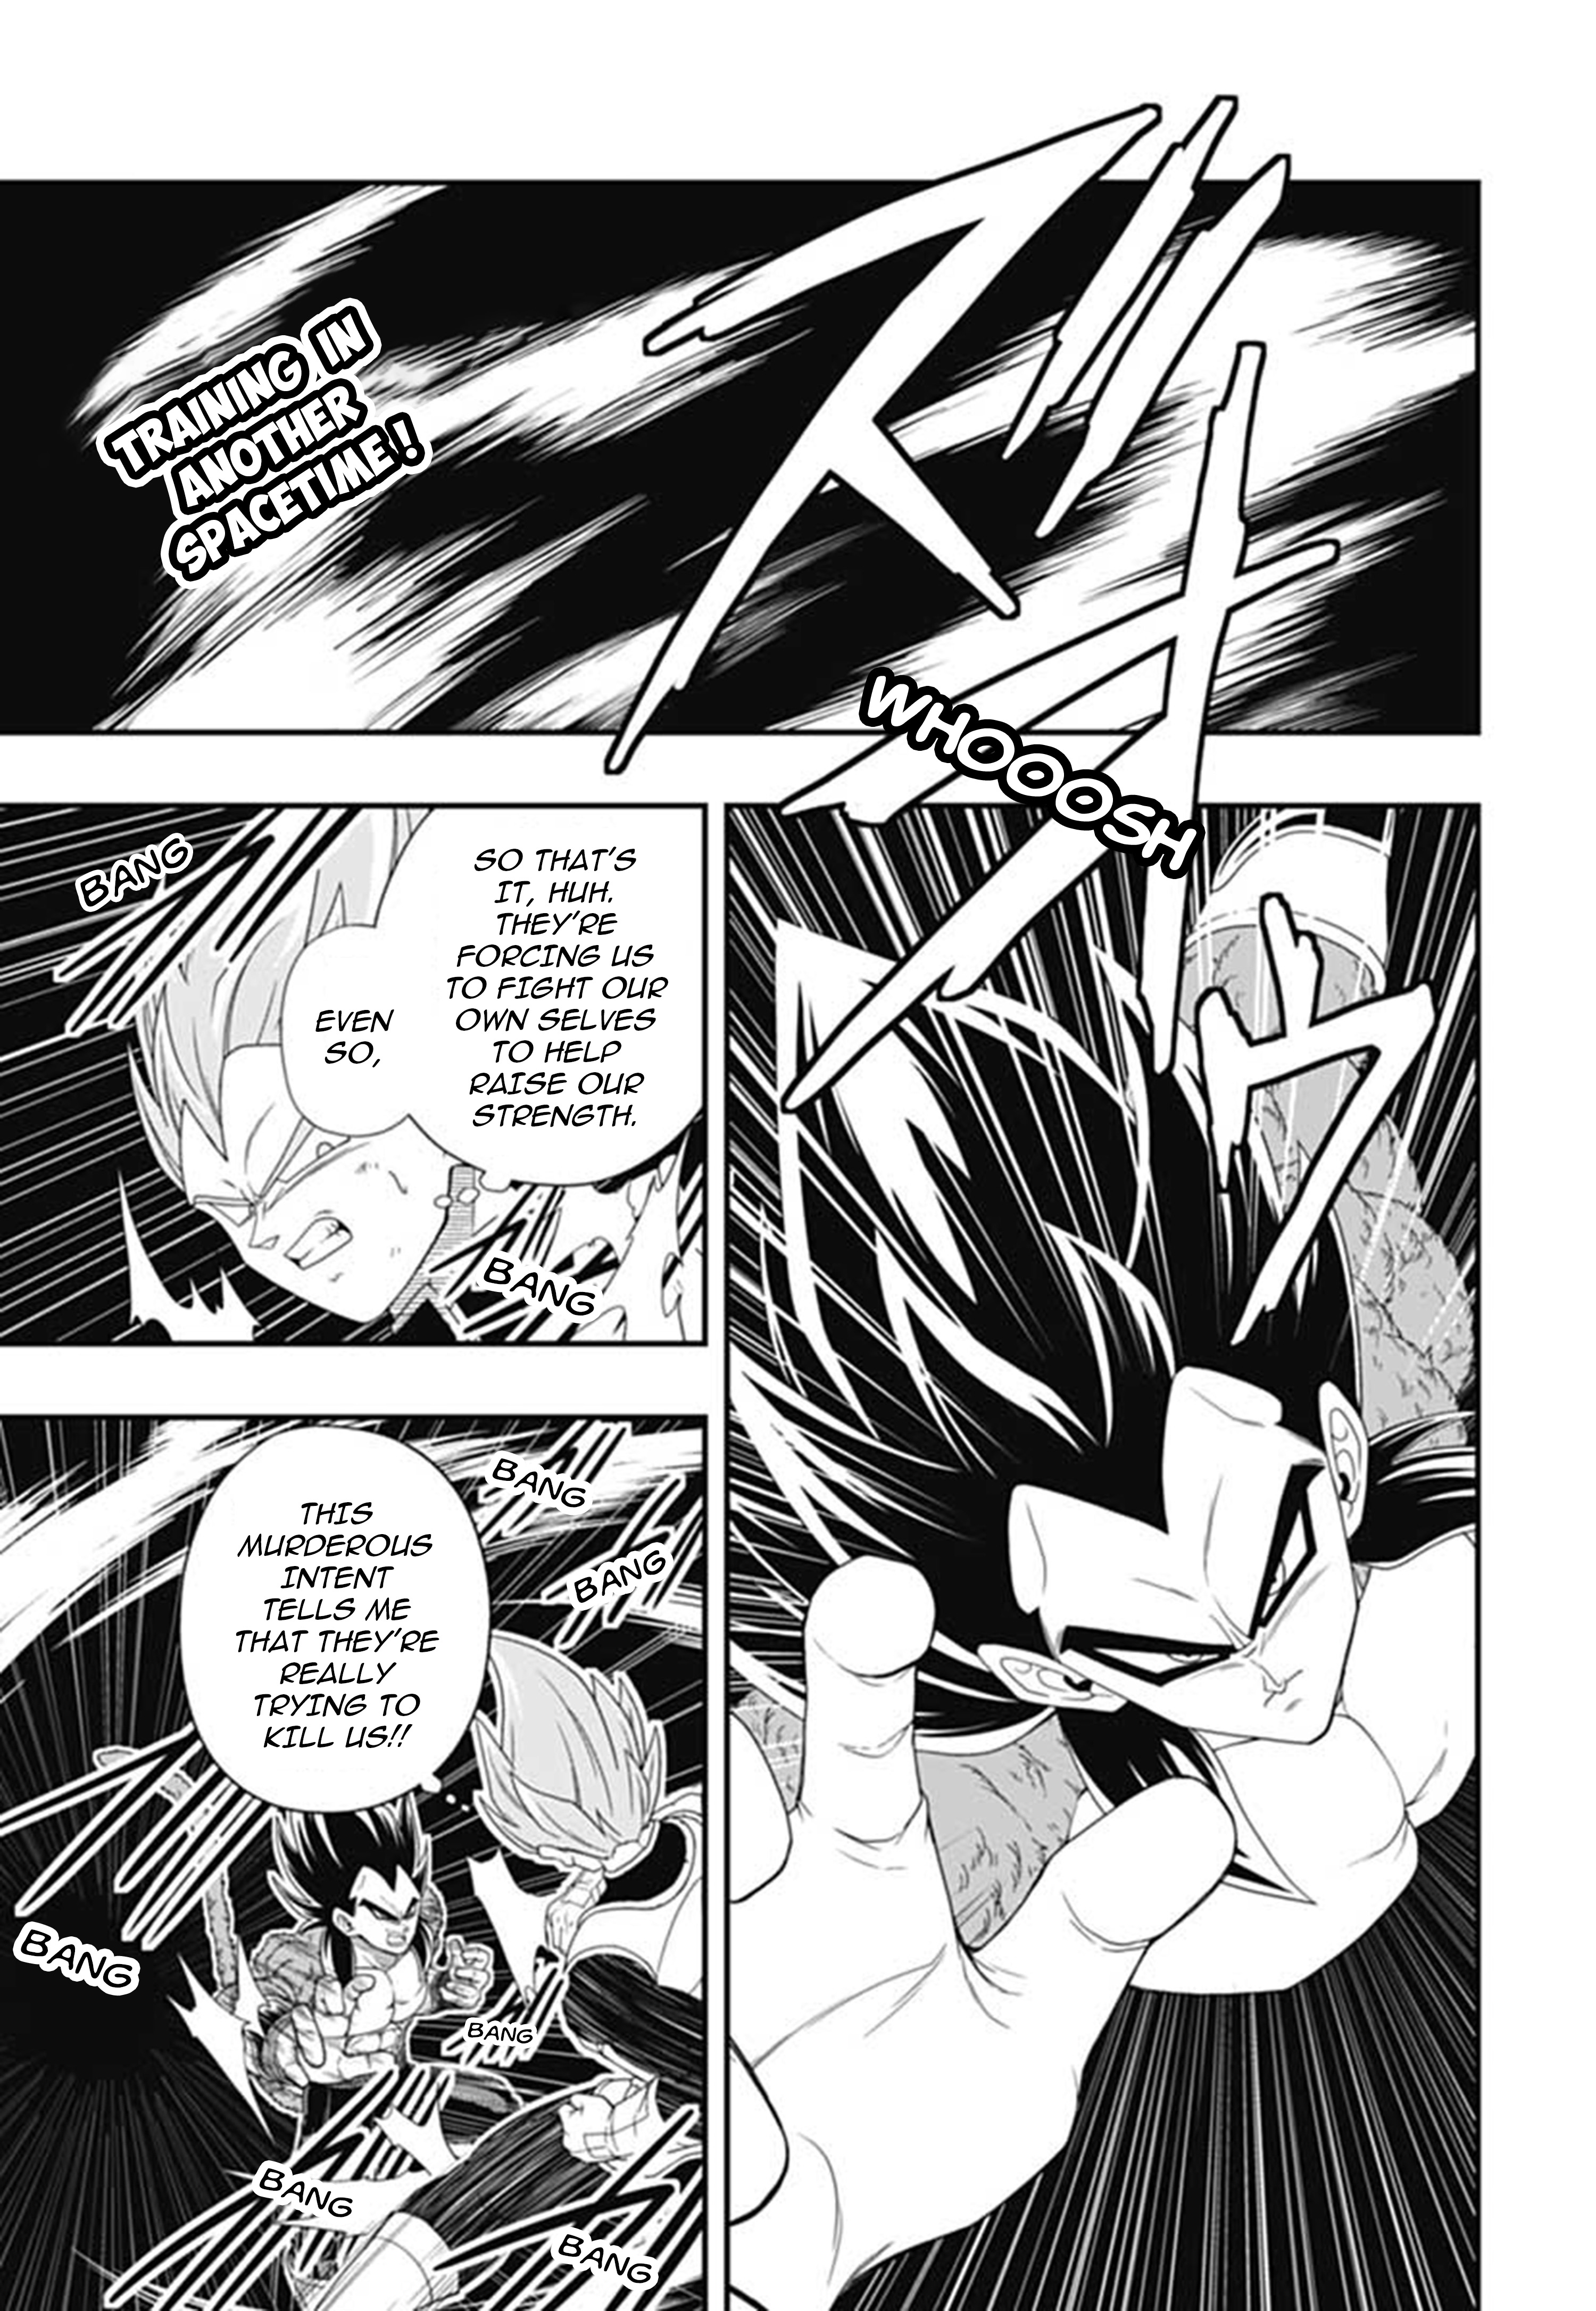 Super Dragon Ball Heroes: Big Bang Mission! Vol.3 Chapter 10: At The Edge Of The Galaxy, Overwhelmingly Dangerous Villains Emerge!! - Picture 3